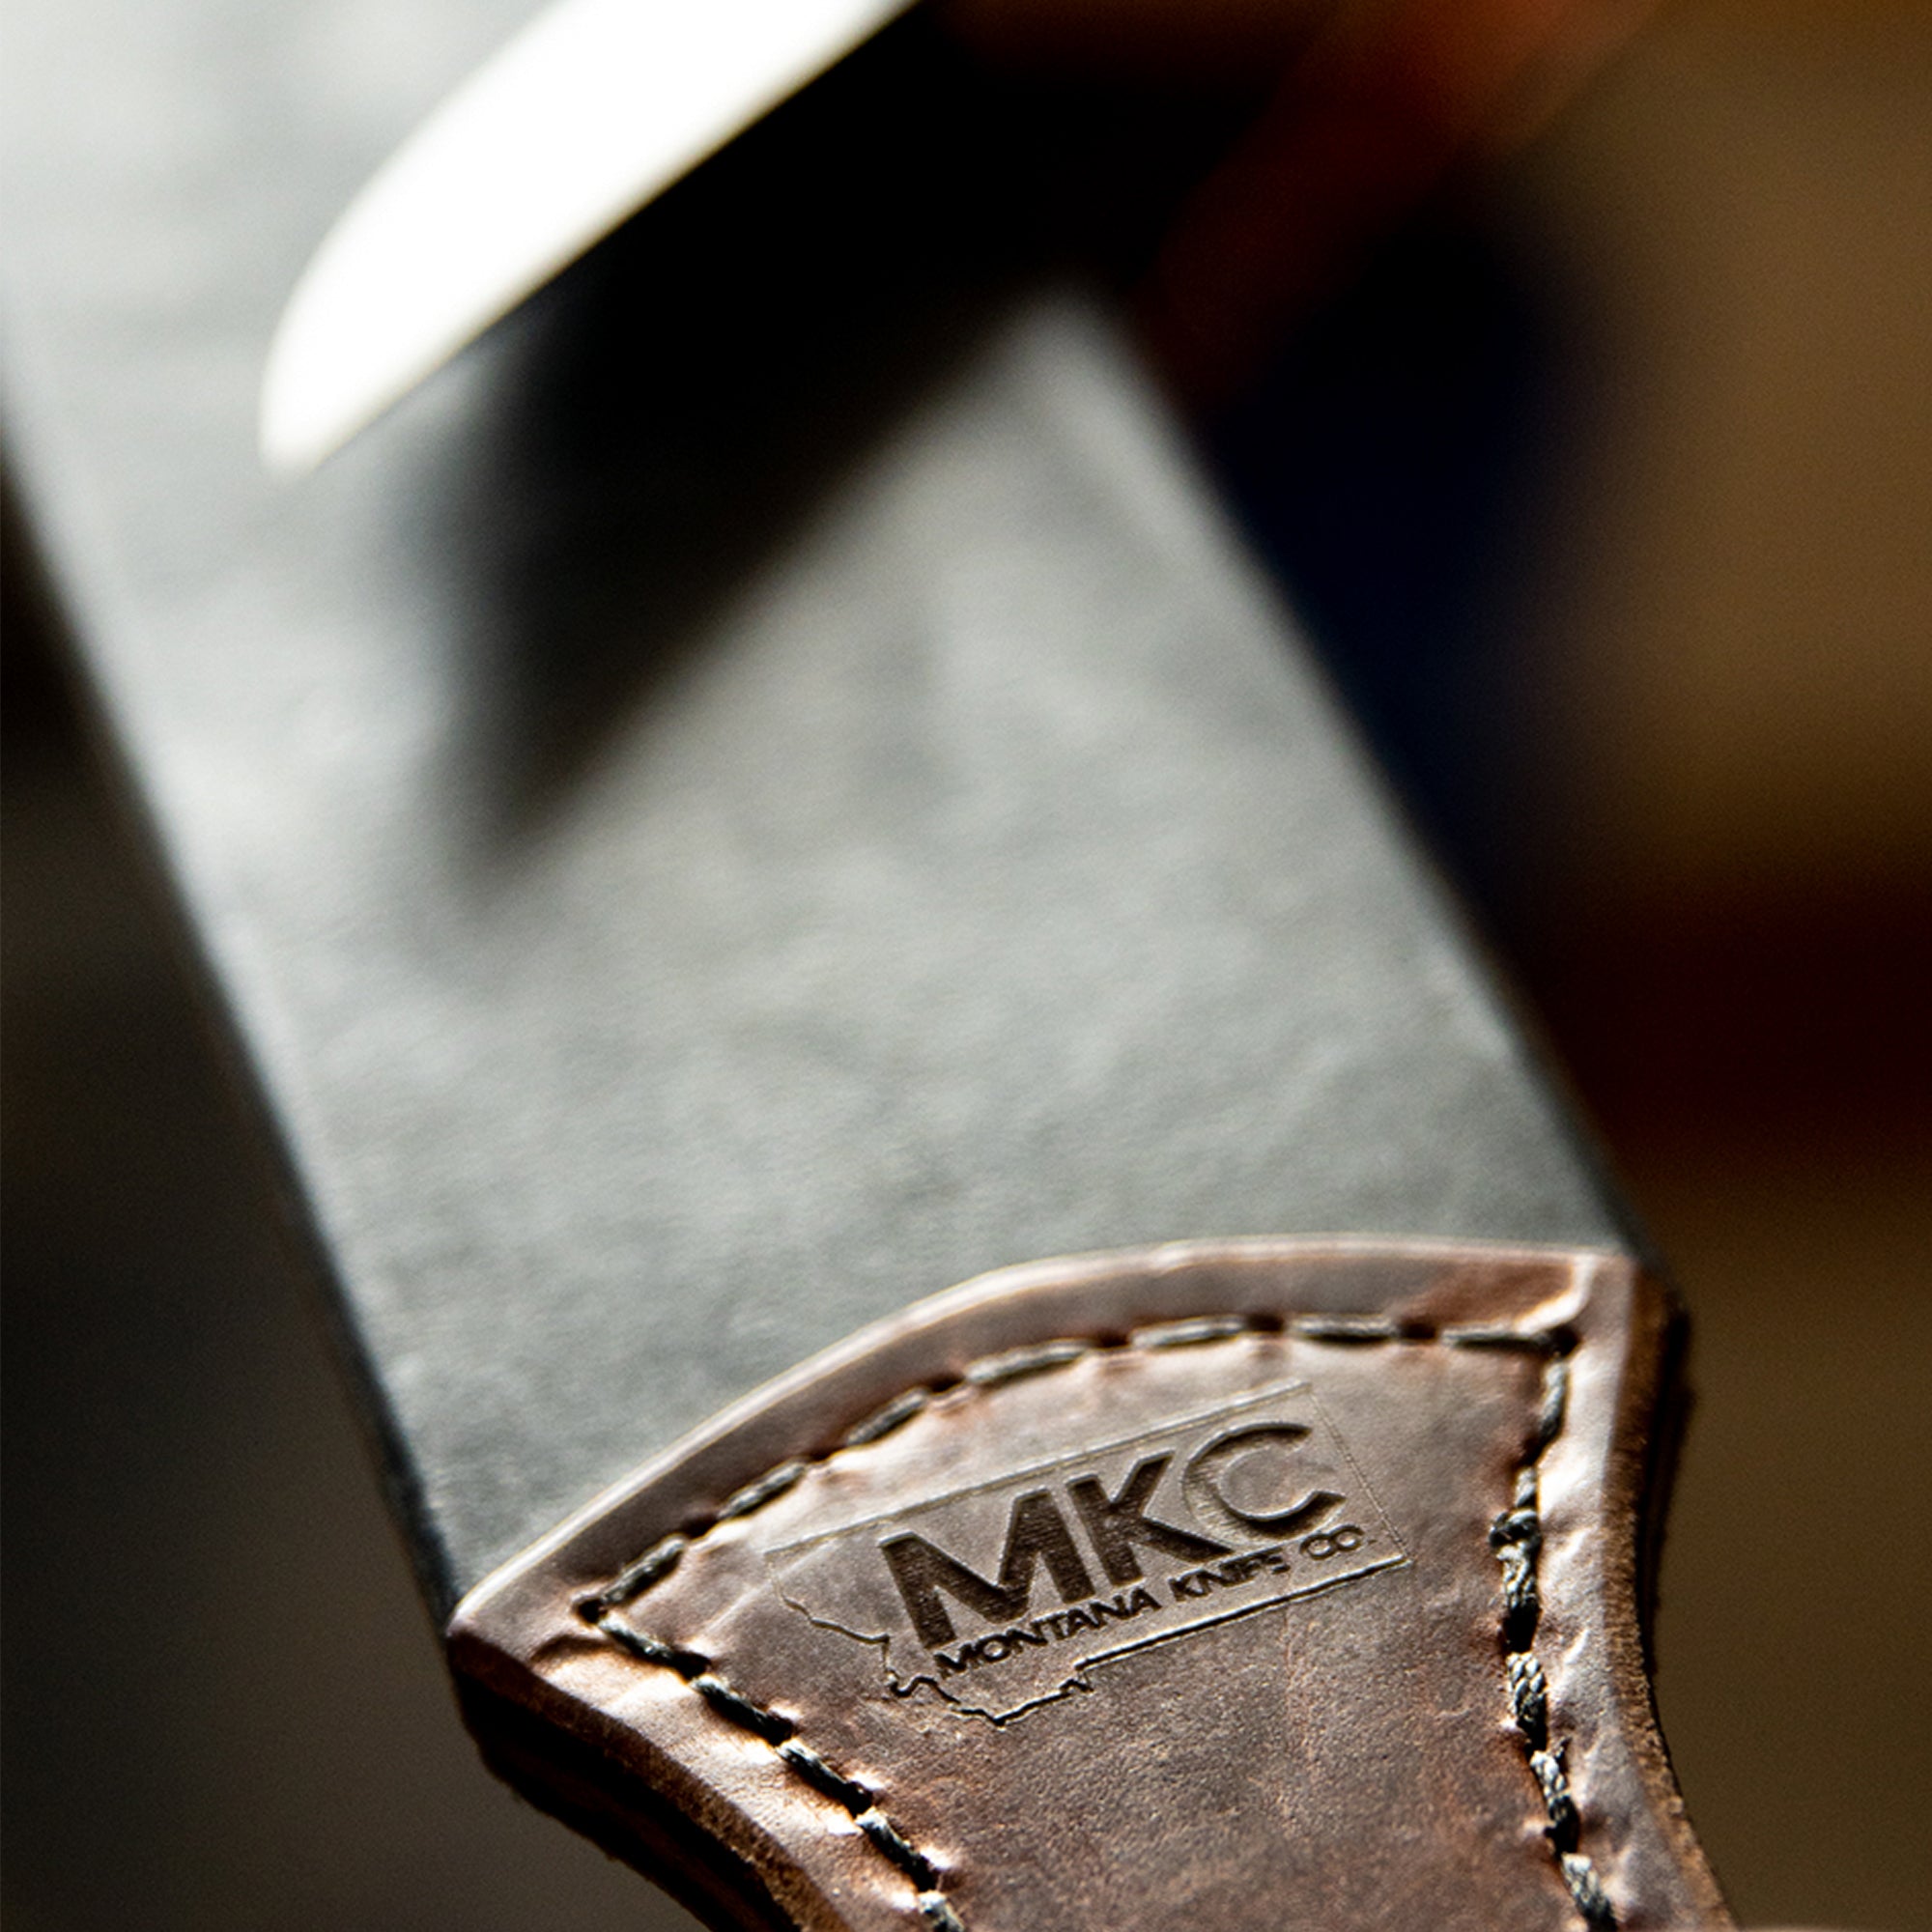 MKC LEATHER STROP - USA MADE